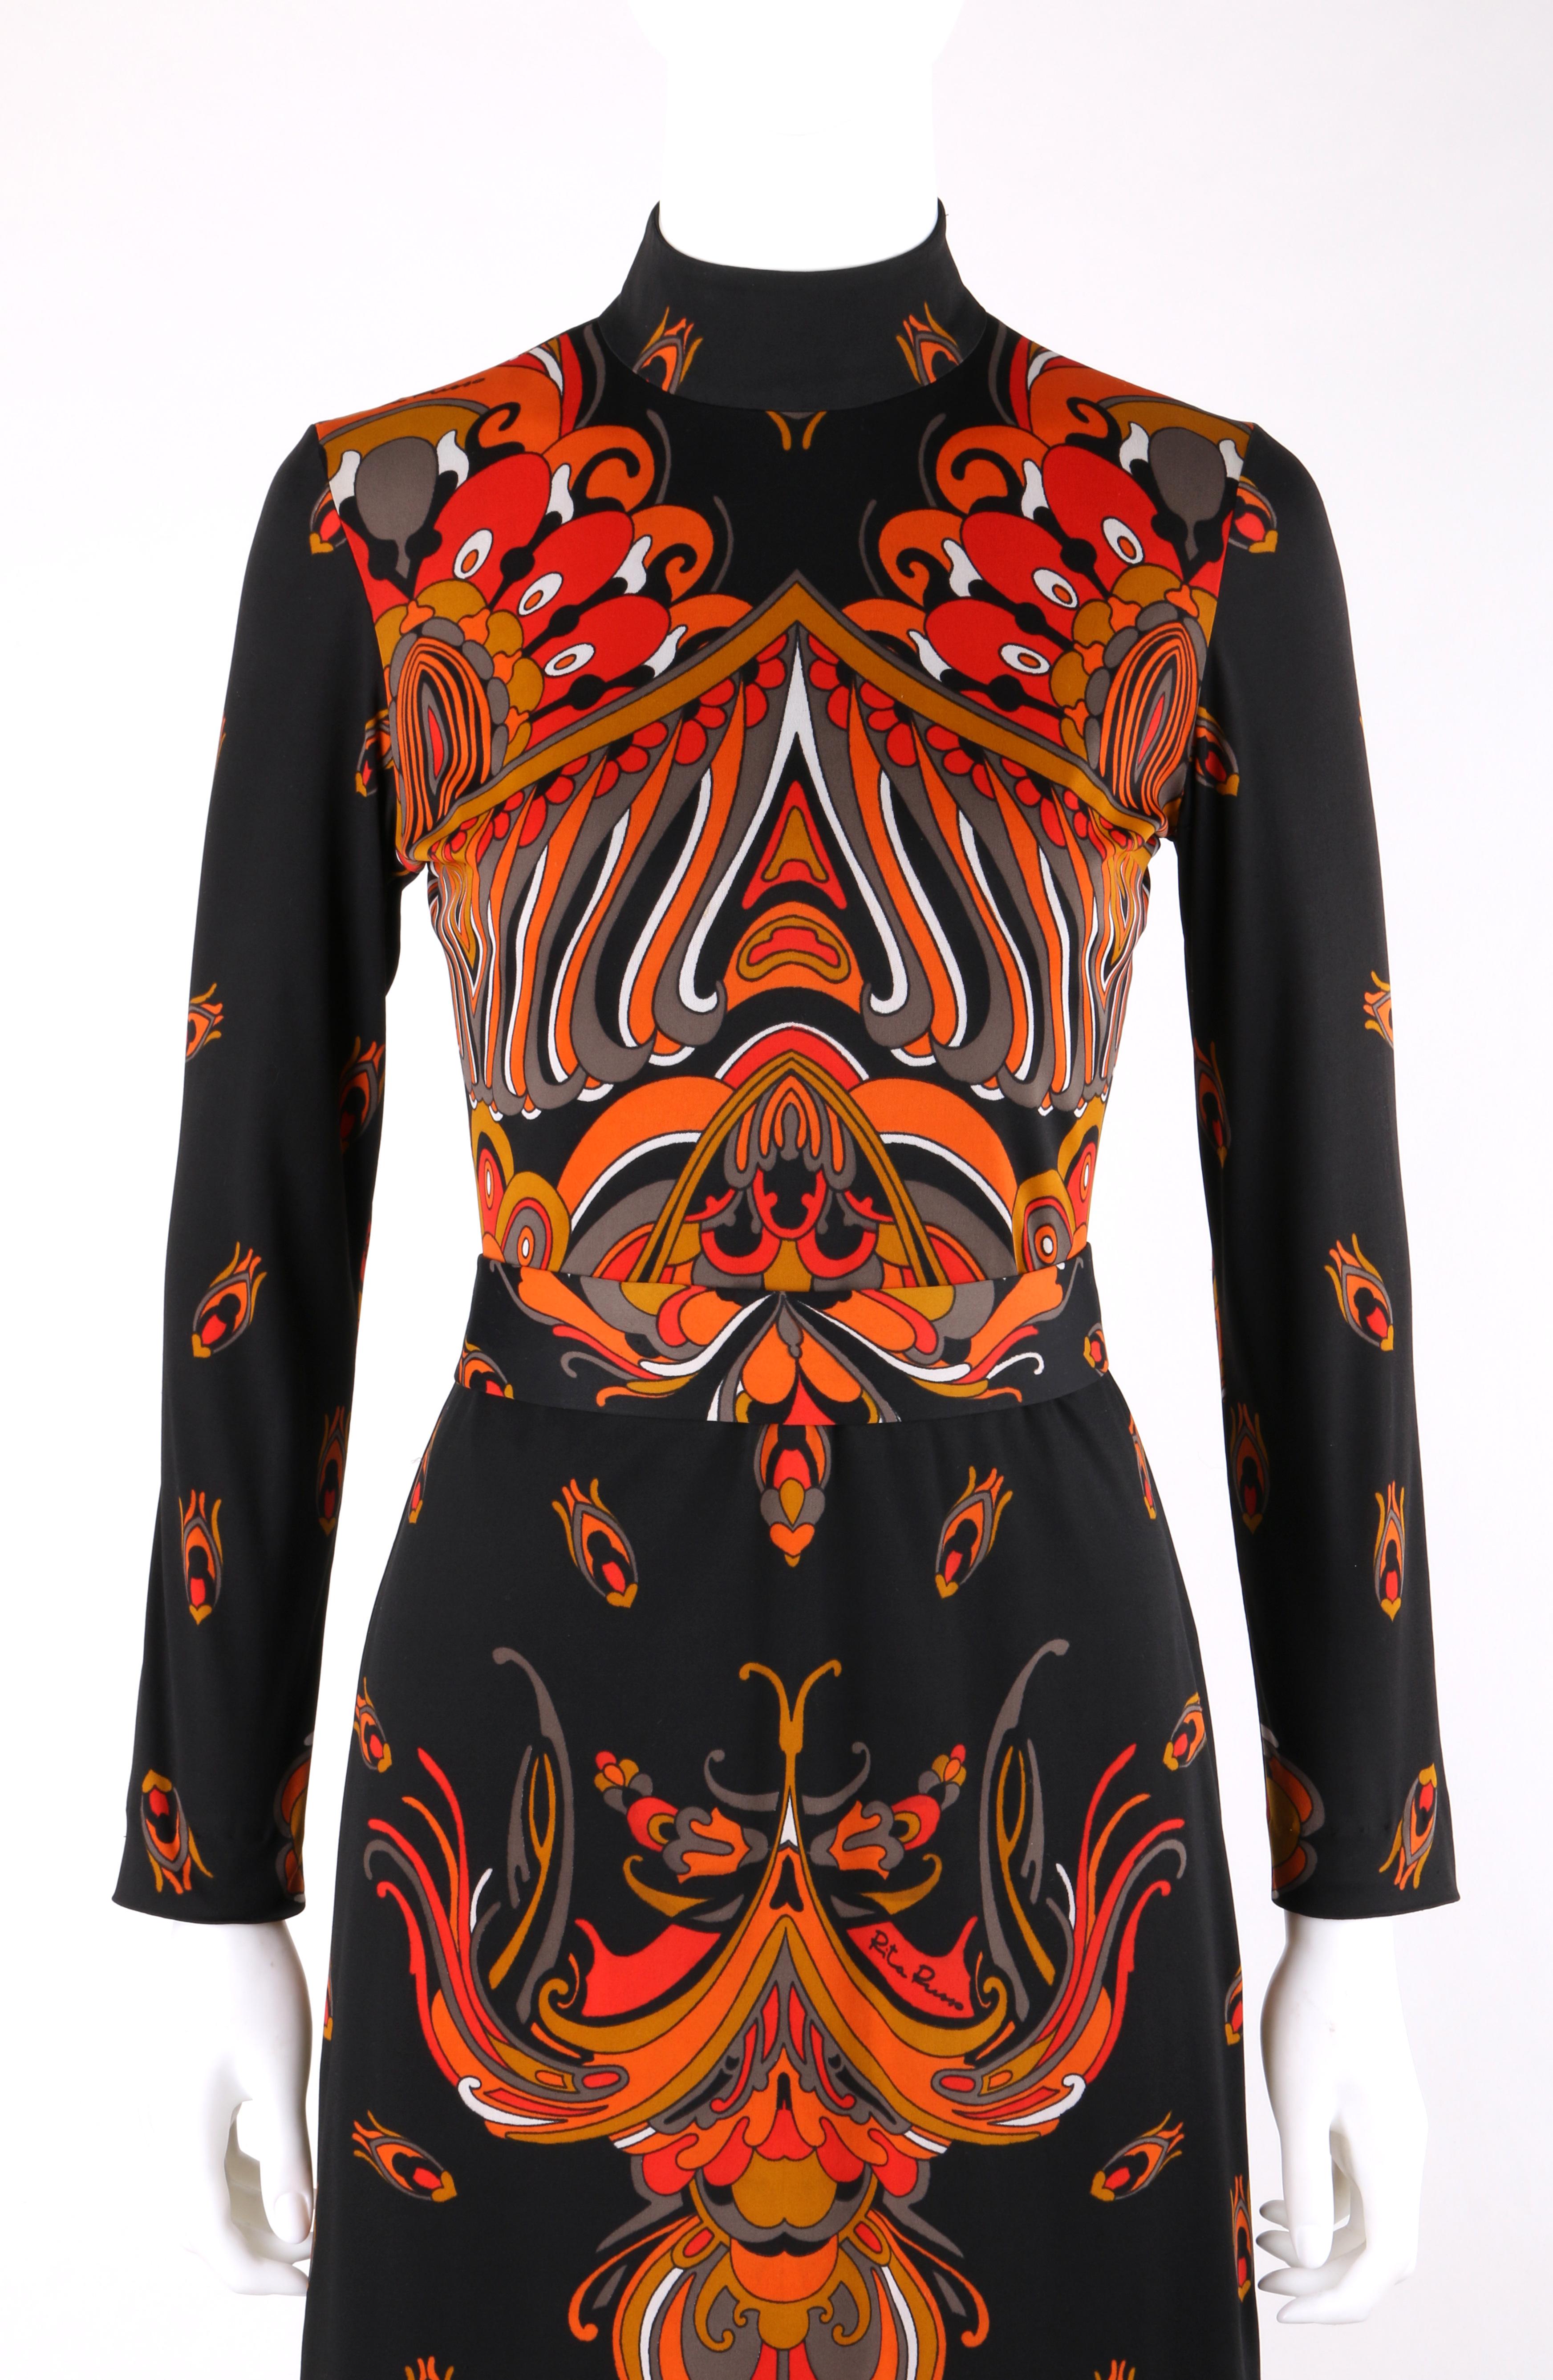 RITA RUSSO c.1970's Black Symmetrical Paisley Signature Print Belted Maxi Dress
 
Circa: 1970’s
Label(s): Rita Russo
Designer: Rita Russo
Style: Maxi dress
Color(s): Black, shades of orange, red, yellow, gray
Lined: No
Unmarked Fabric Content: